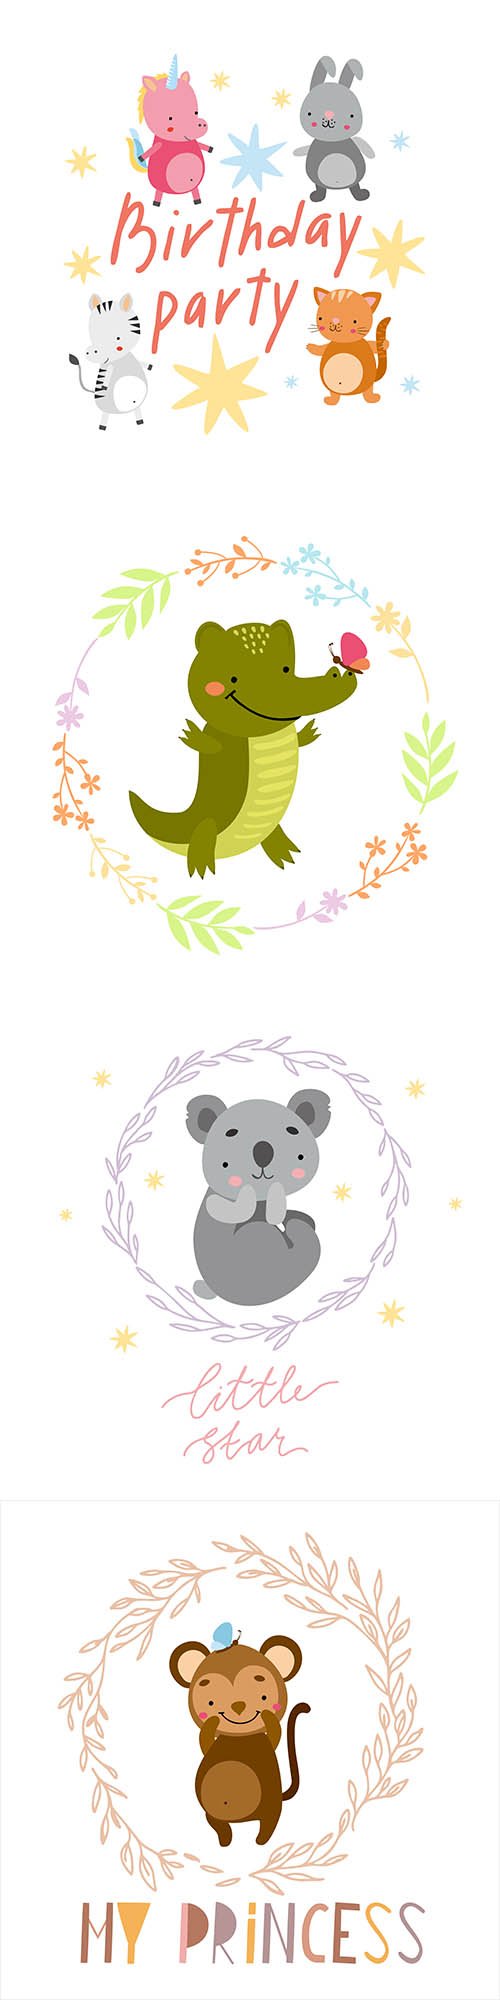 Birthday party illustrations with animals